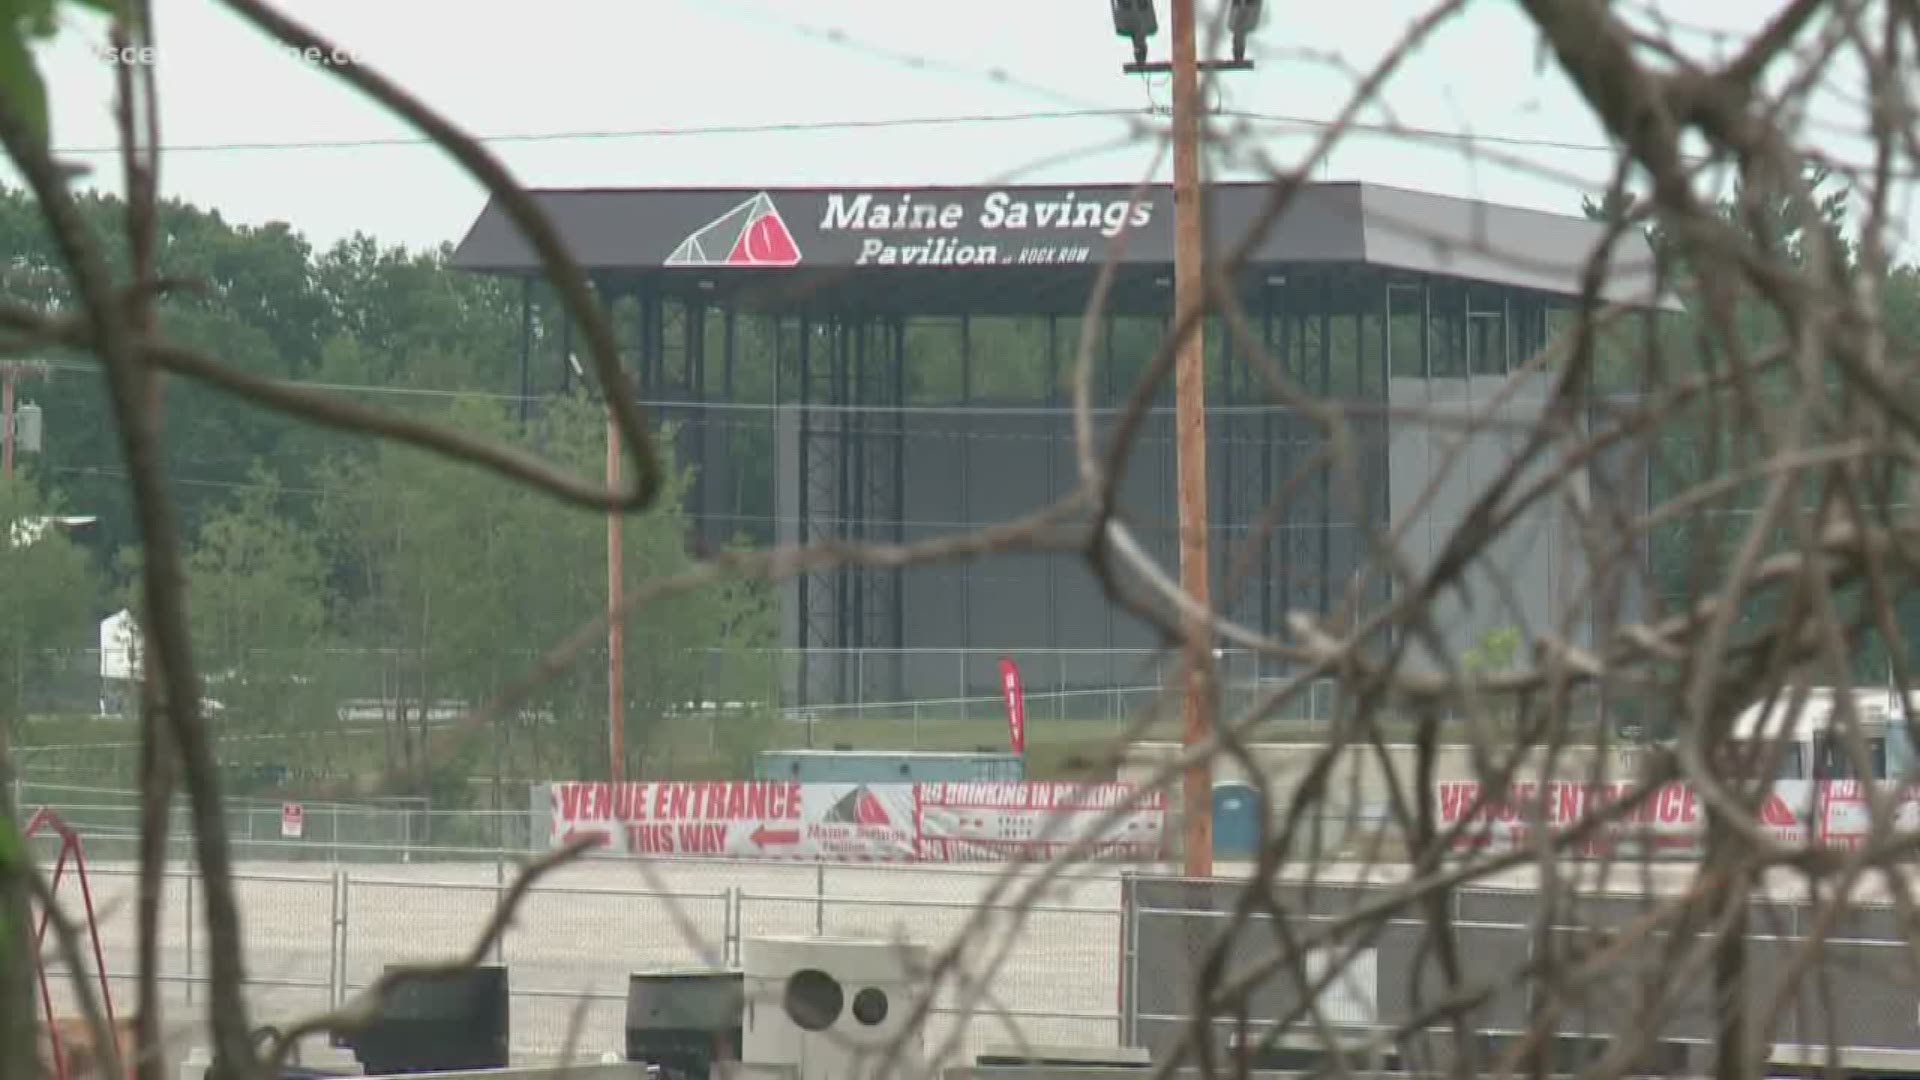 While Rock Row in Westbrook has made some changes to mitigate noise, neighbors to the Maine Savings Pavilion say there are still problems.